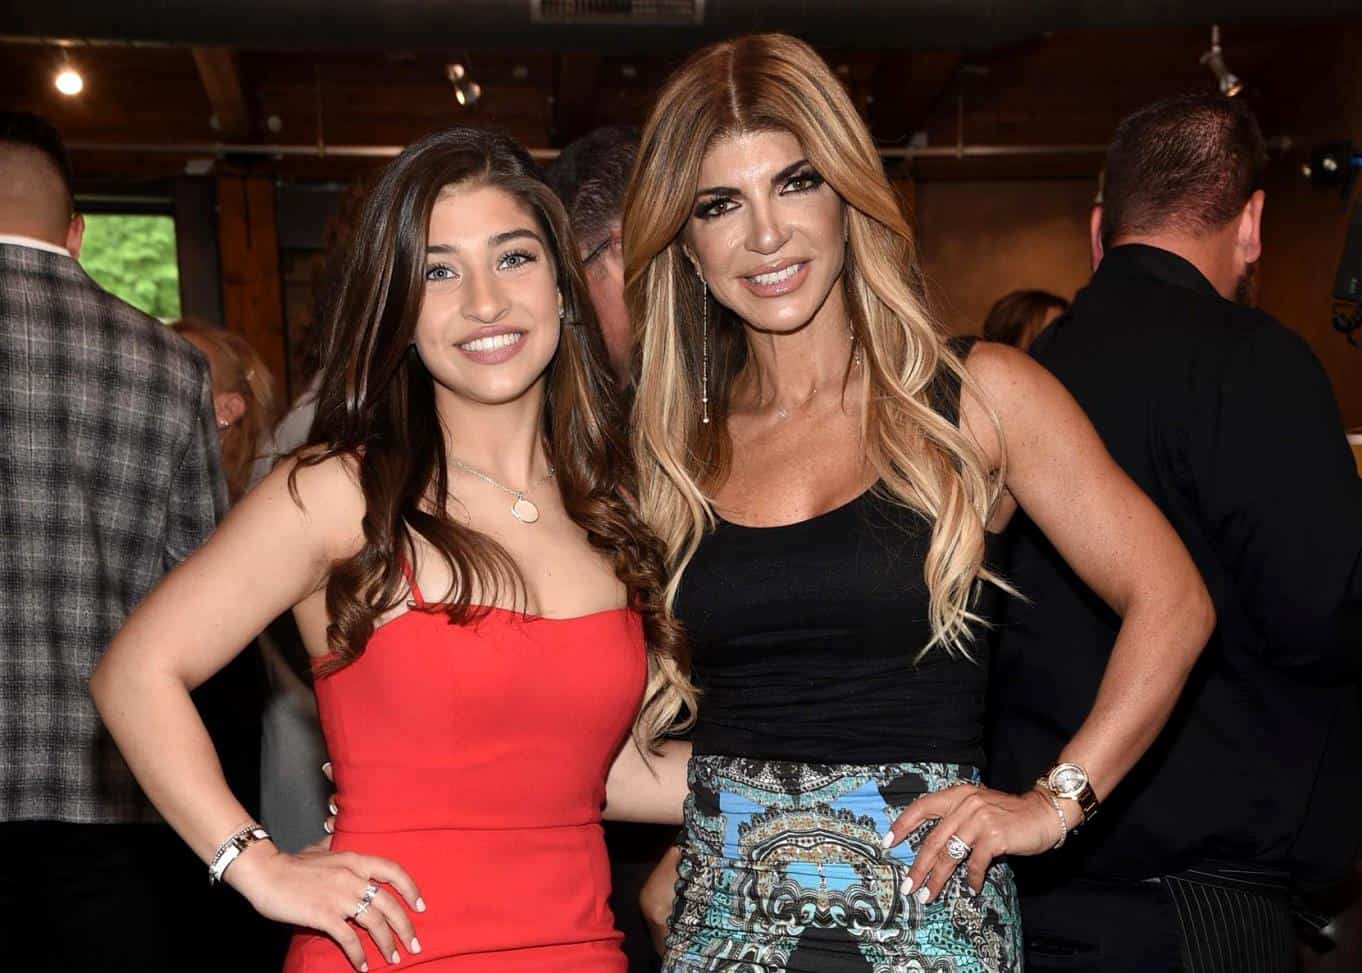 PHOTOS: RHONJ Star Gia Giudice Shares Picture of Her Nose Job, See a Before and After Plastic Surgery Photo of Teresa Giudice's Daughter Gia